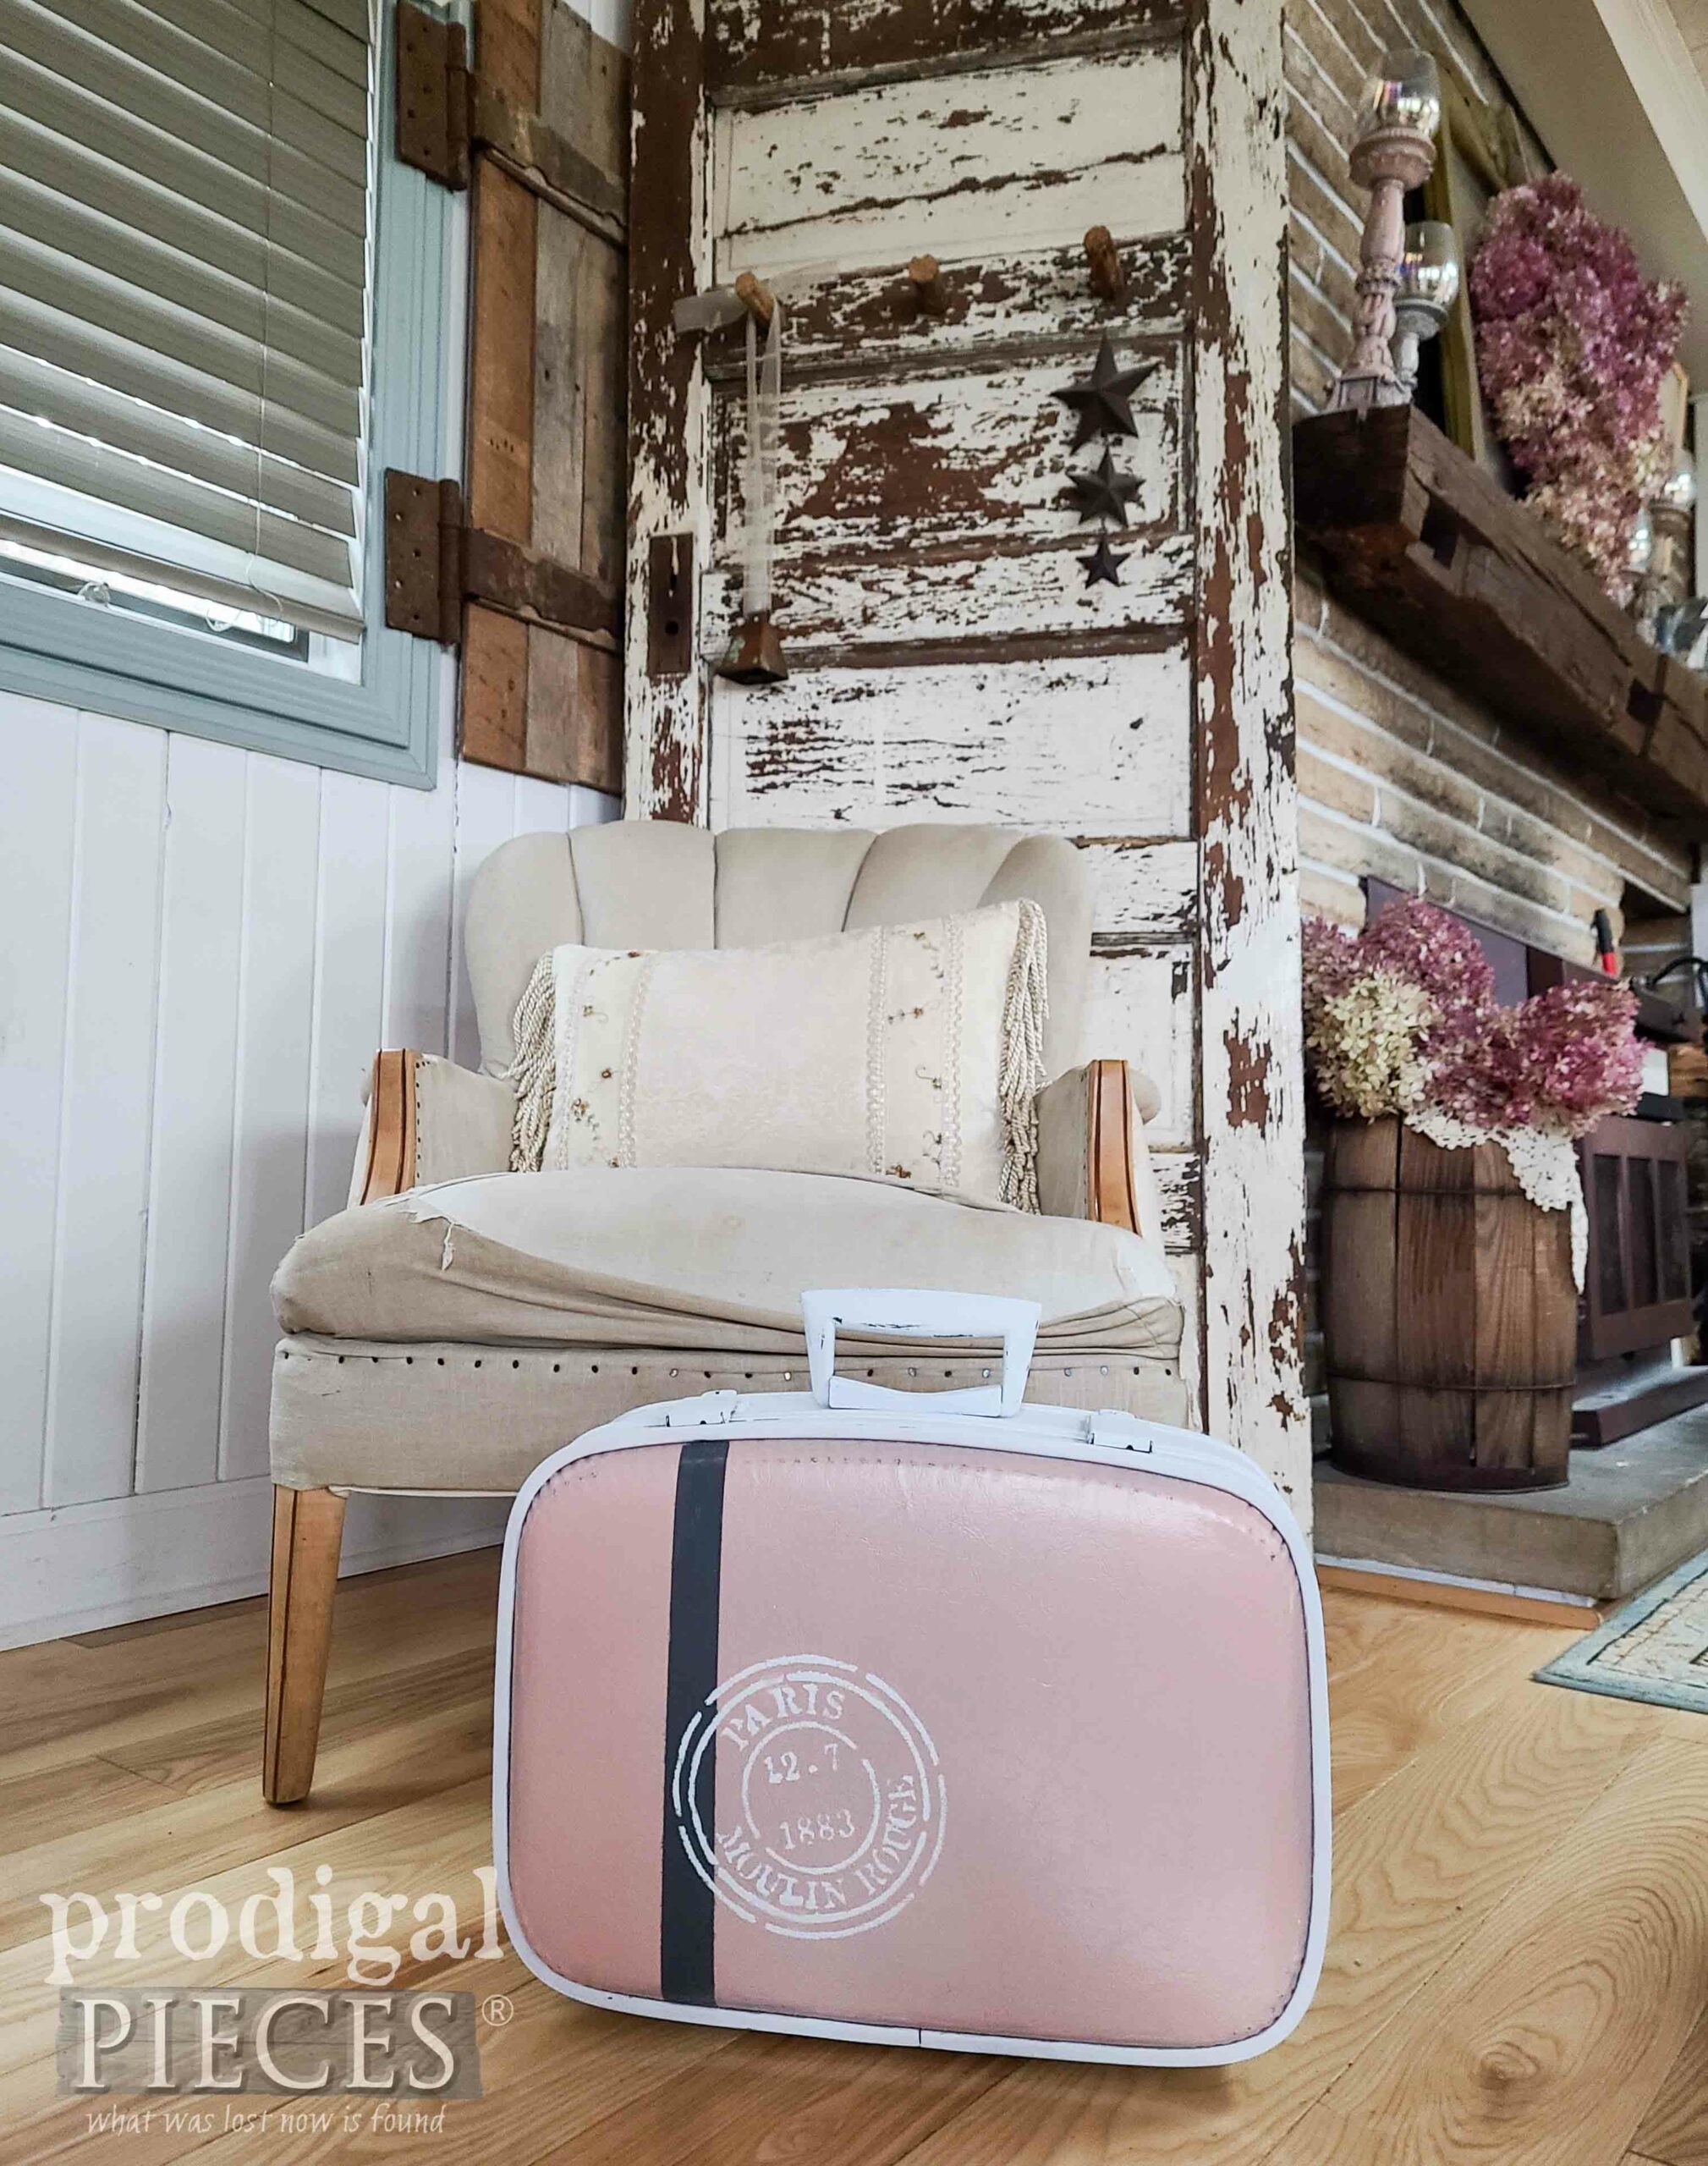 French Chic Vintage Suitcase Upcycled with Refashion by Larissa of Prodigal Pieces | prodigalpieces.com #prodigalpieces